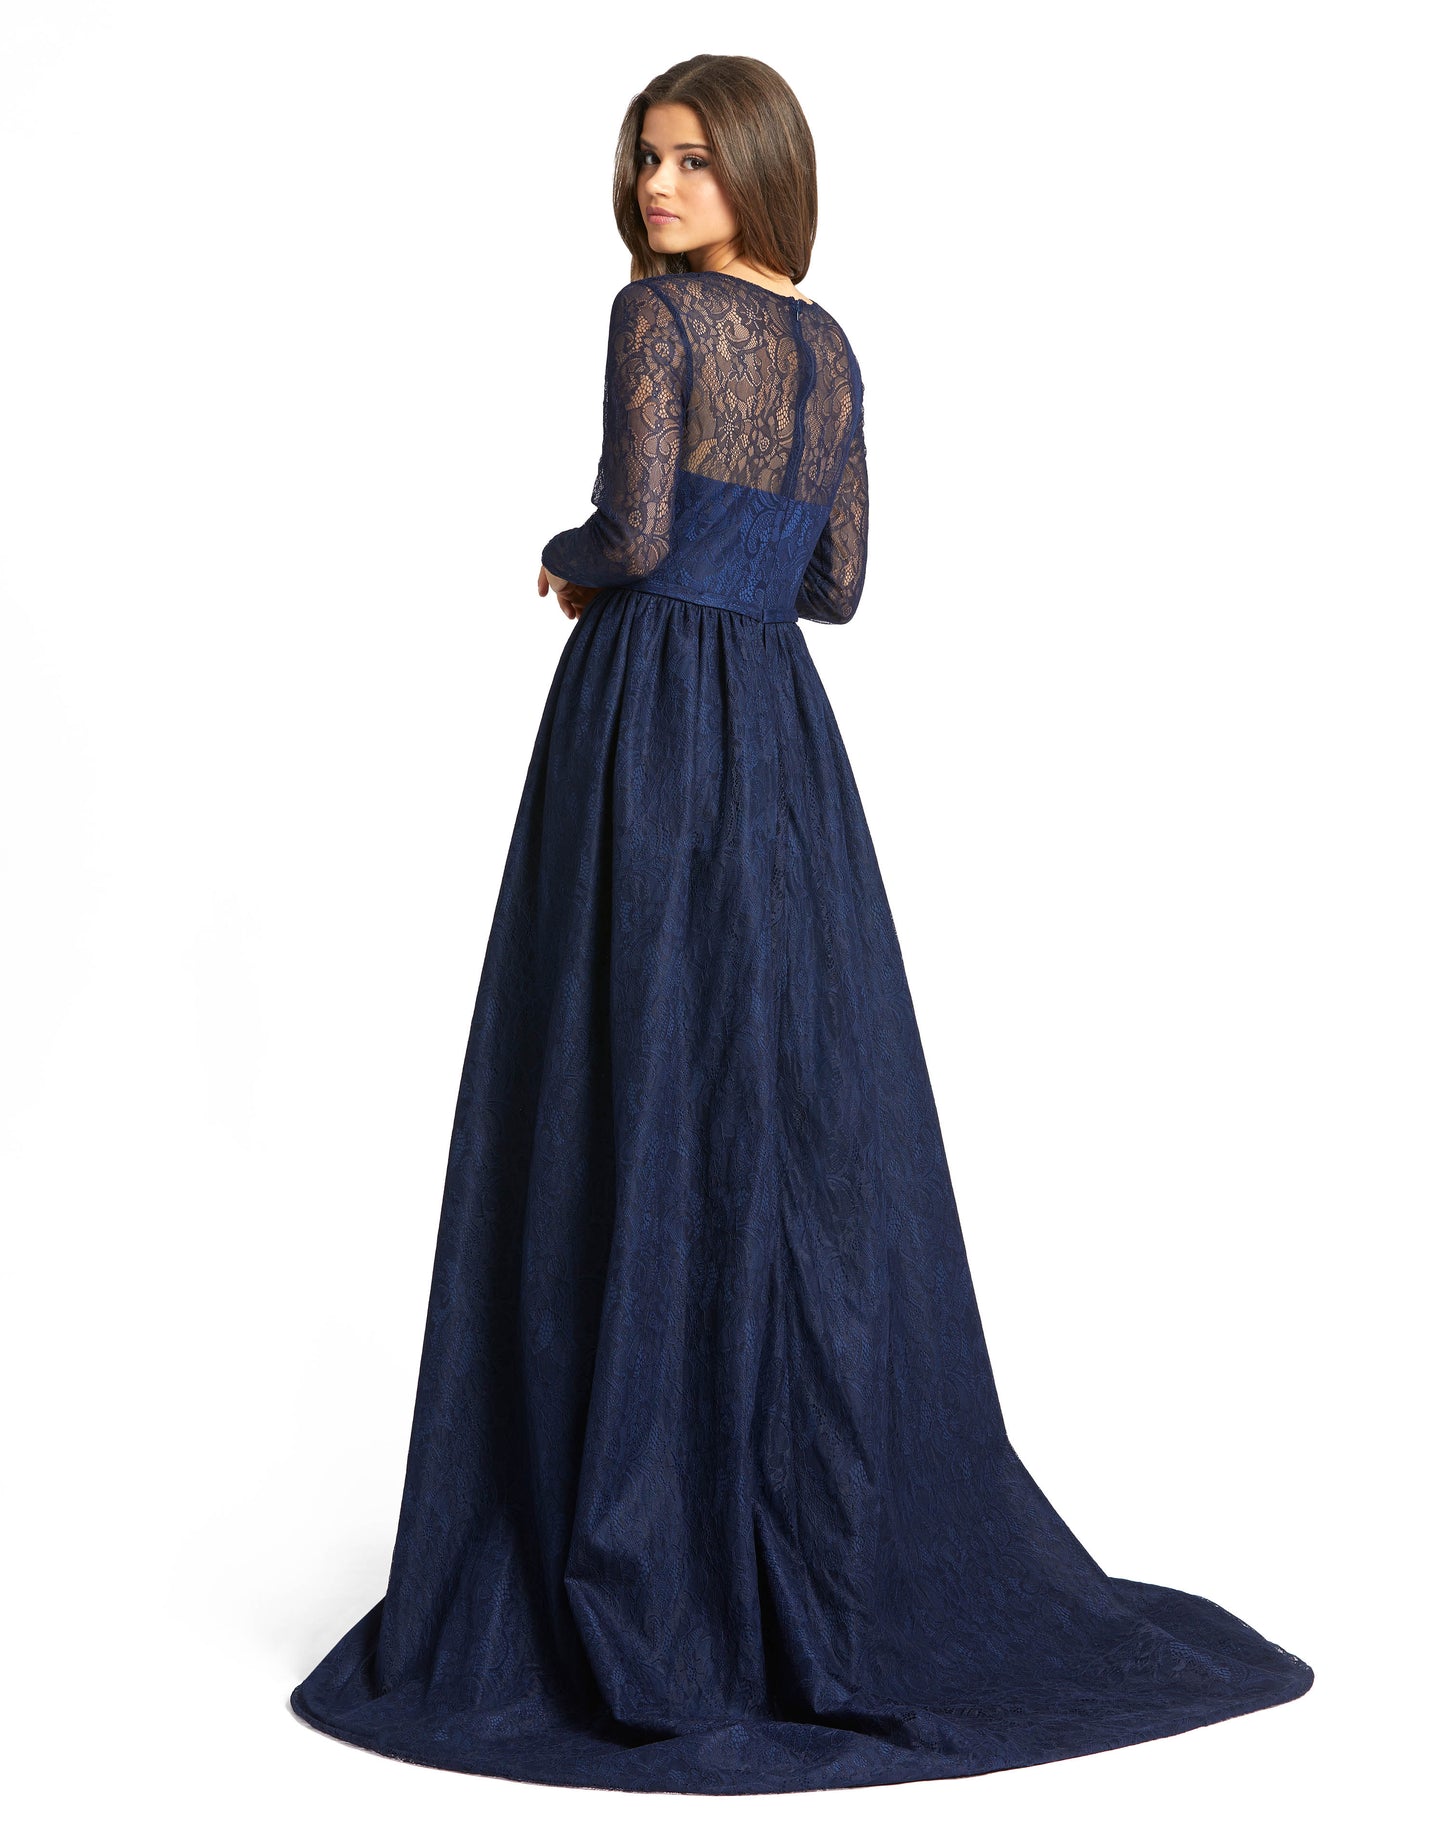 This jaw-dropping ballgown is crafted from floral lace with sheer long sleeves and an illusion yoke. The gown is cut in a slim column shape with a sweeping overlay at the back and sides for a grand and feminine finish. Mac Duggal Lace fabric (100% Polyest